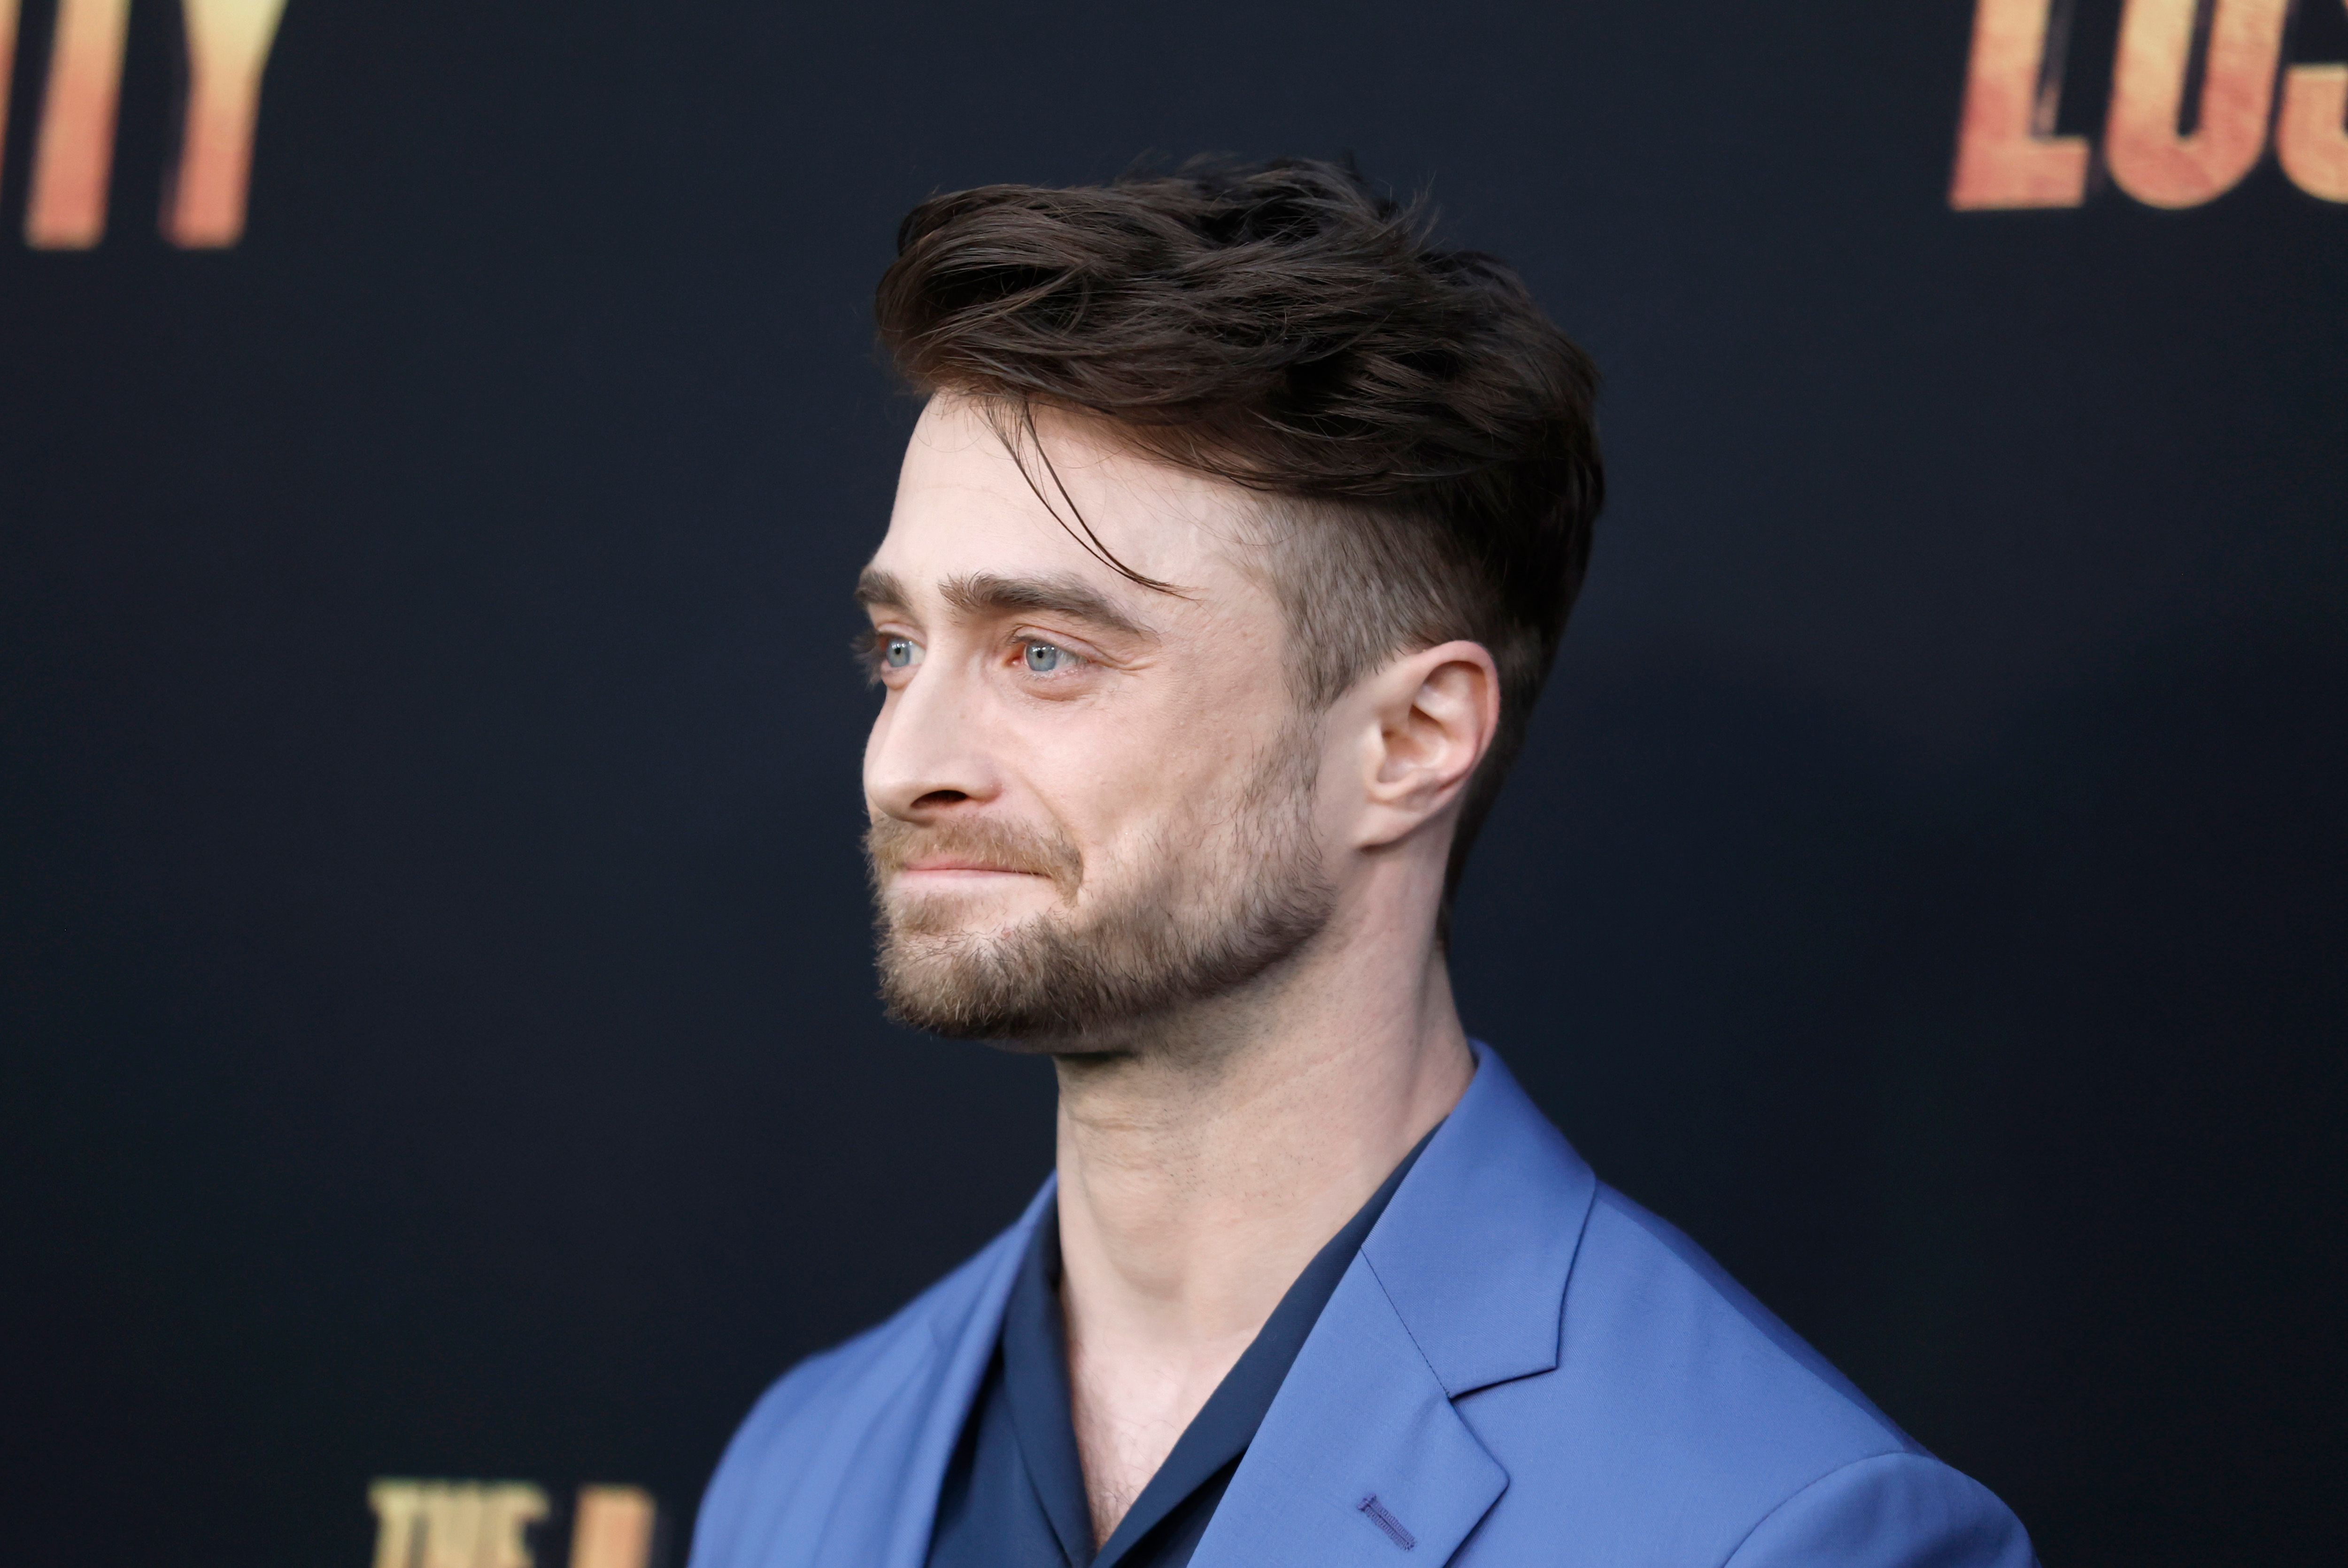 Daniel Radcliffe attends the Los Angeles premiere of The Lost City